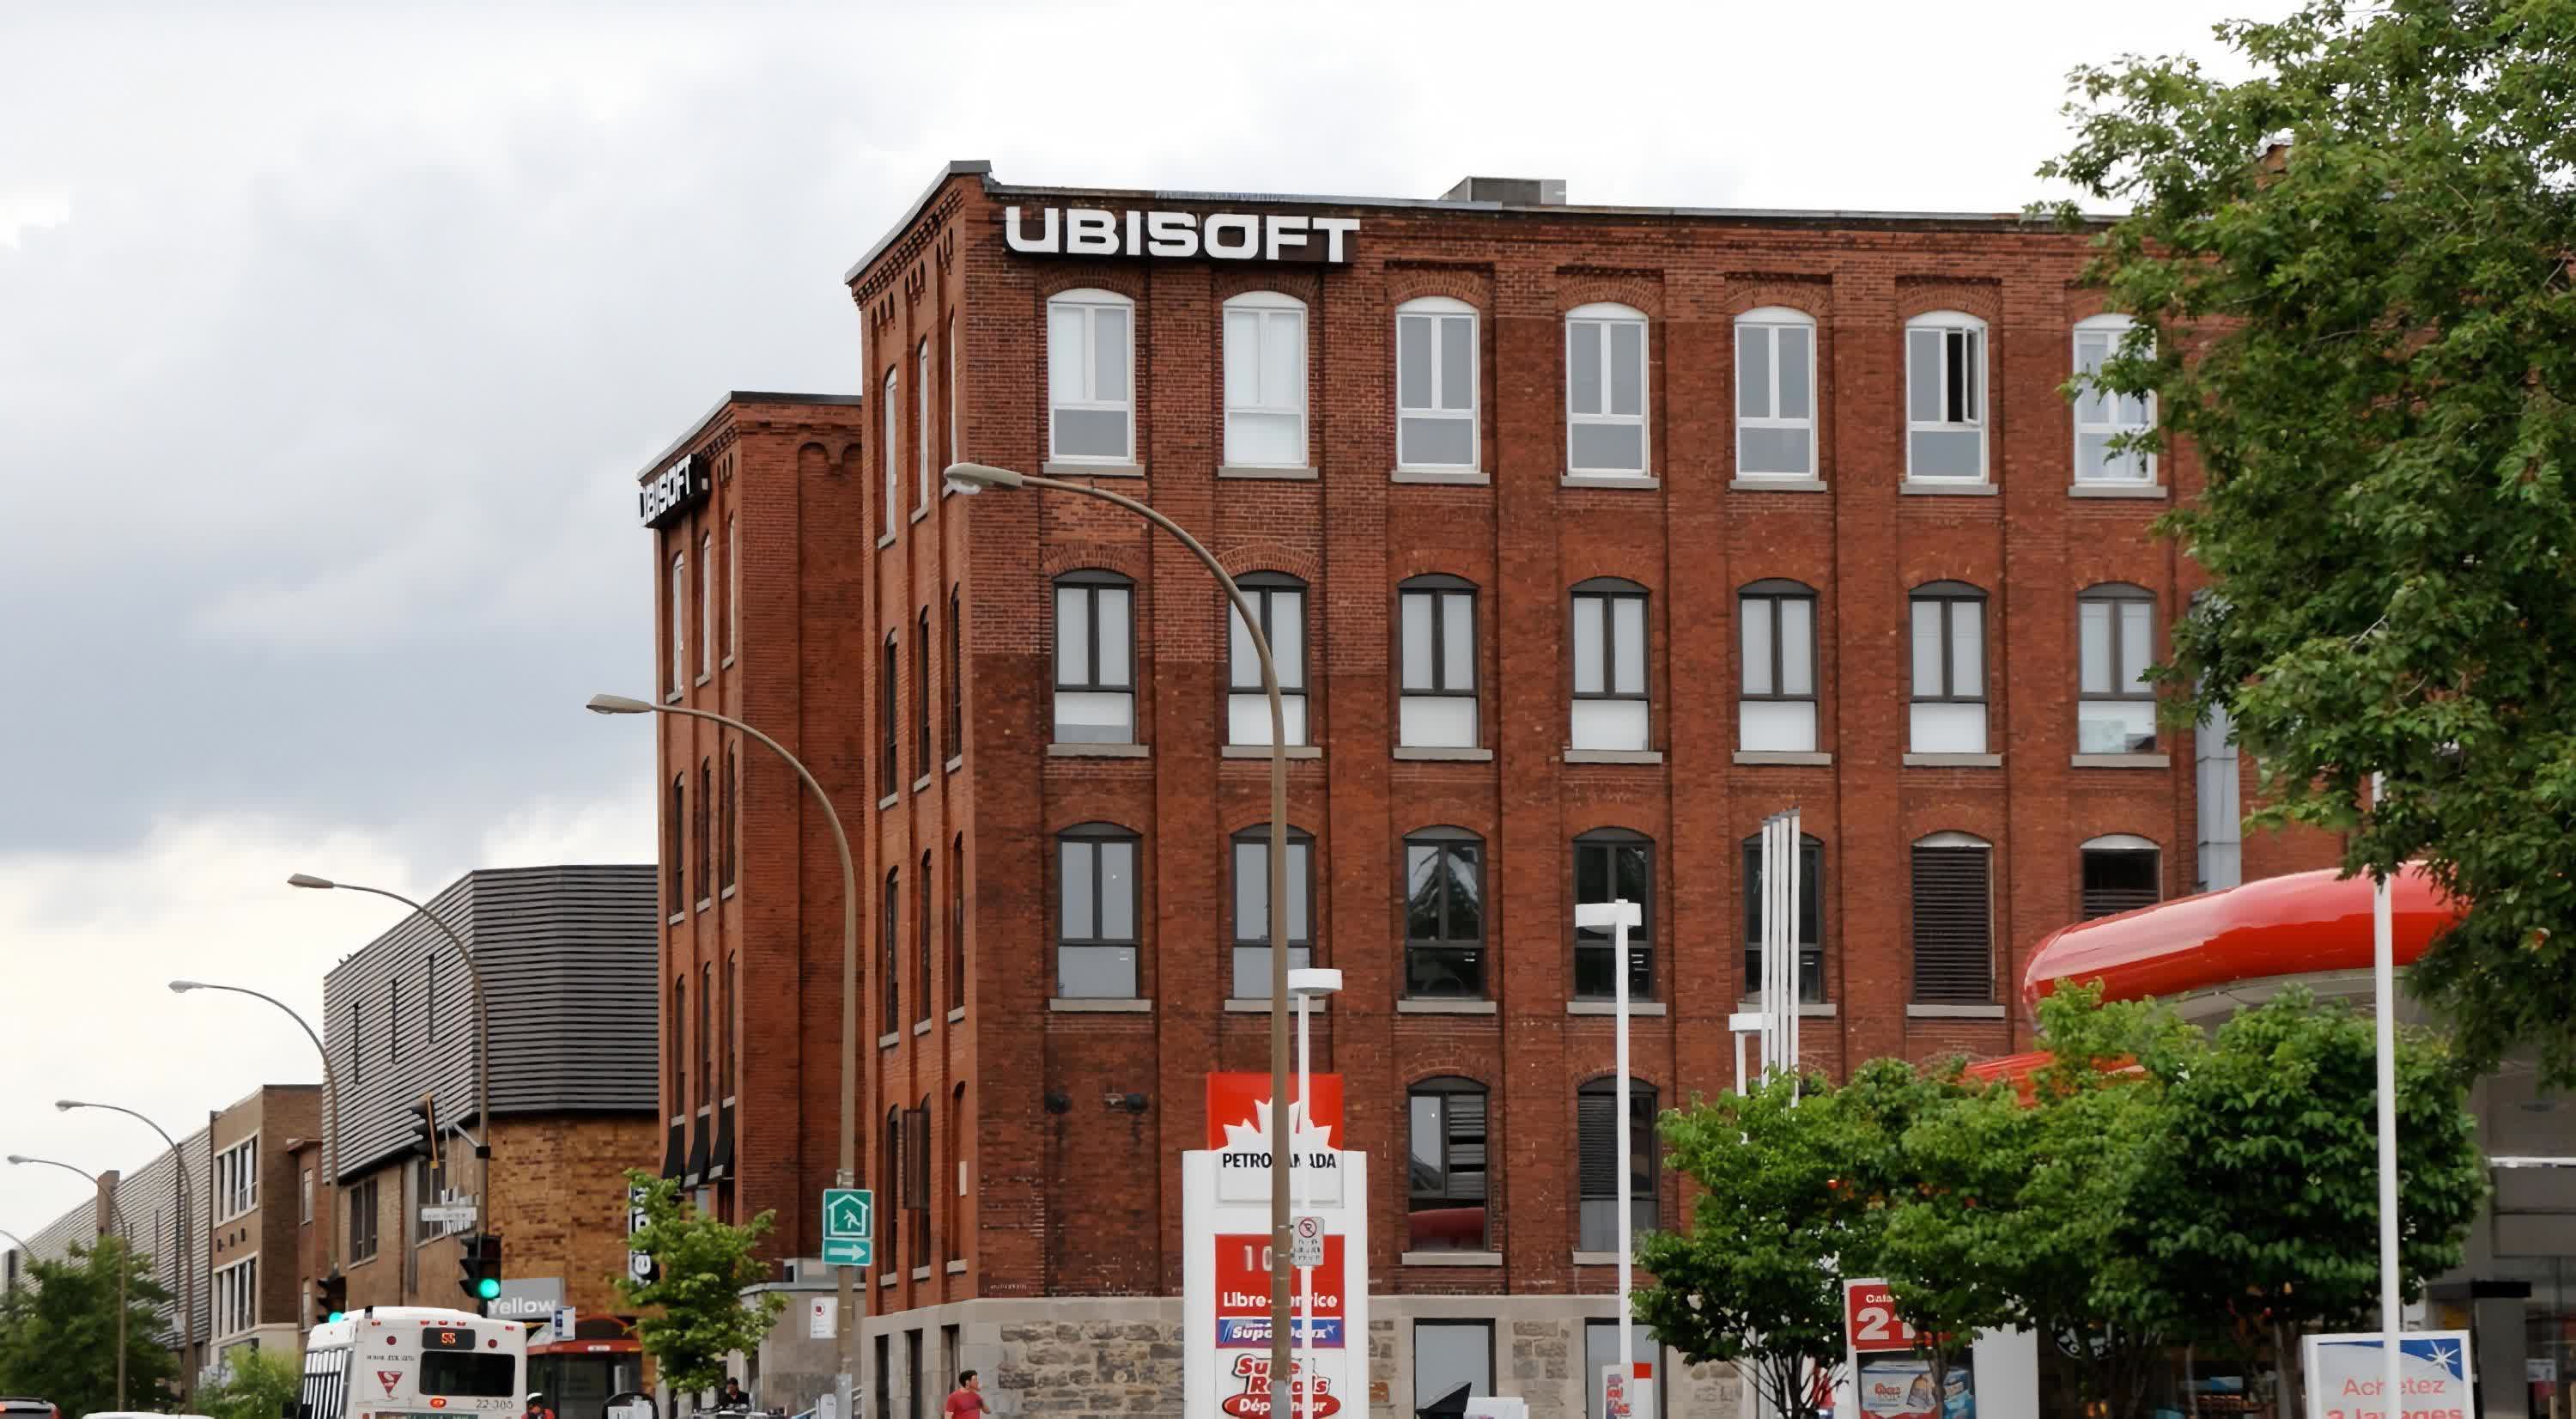 Ubisoft Montreal office involved in fake bomb threat